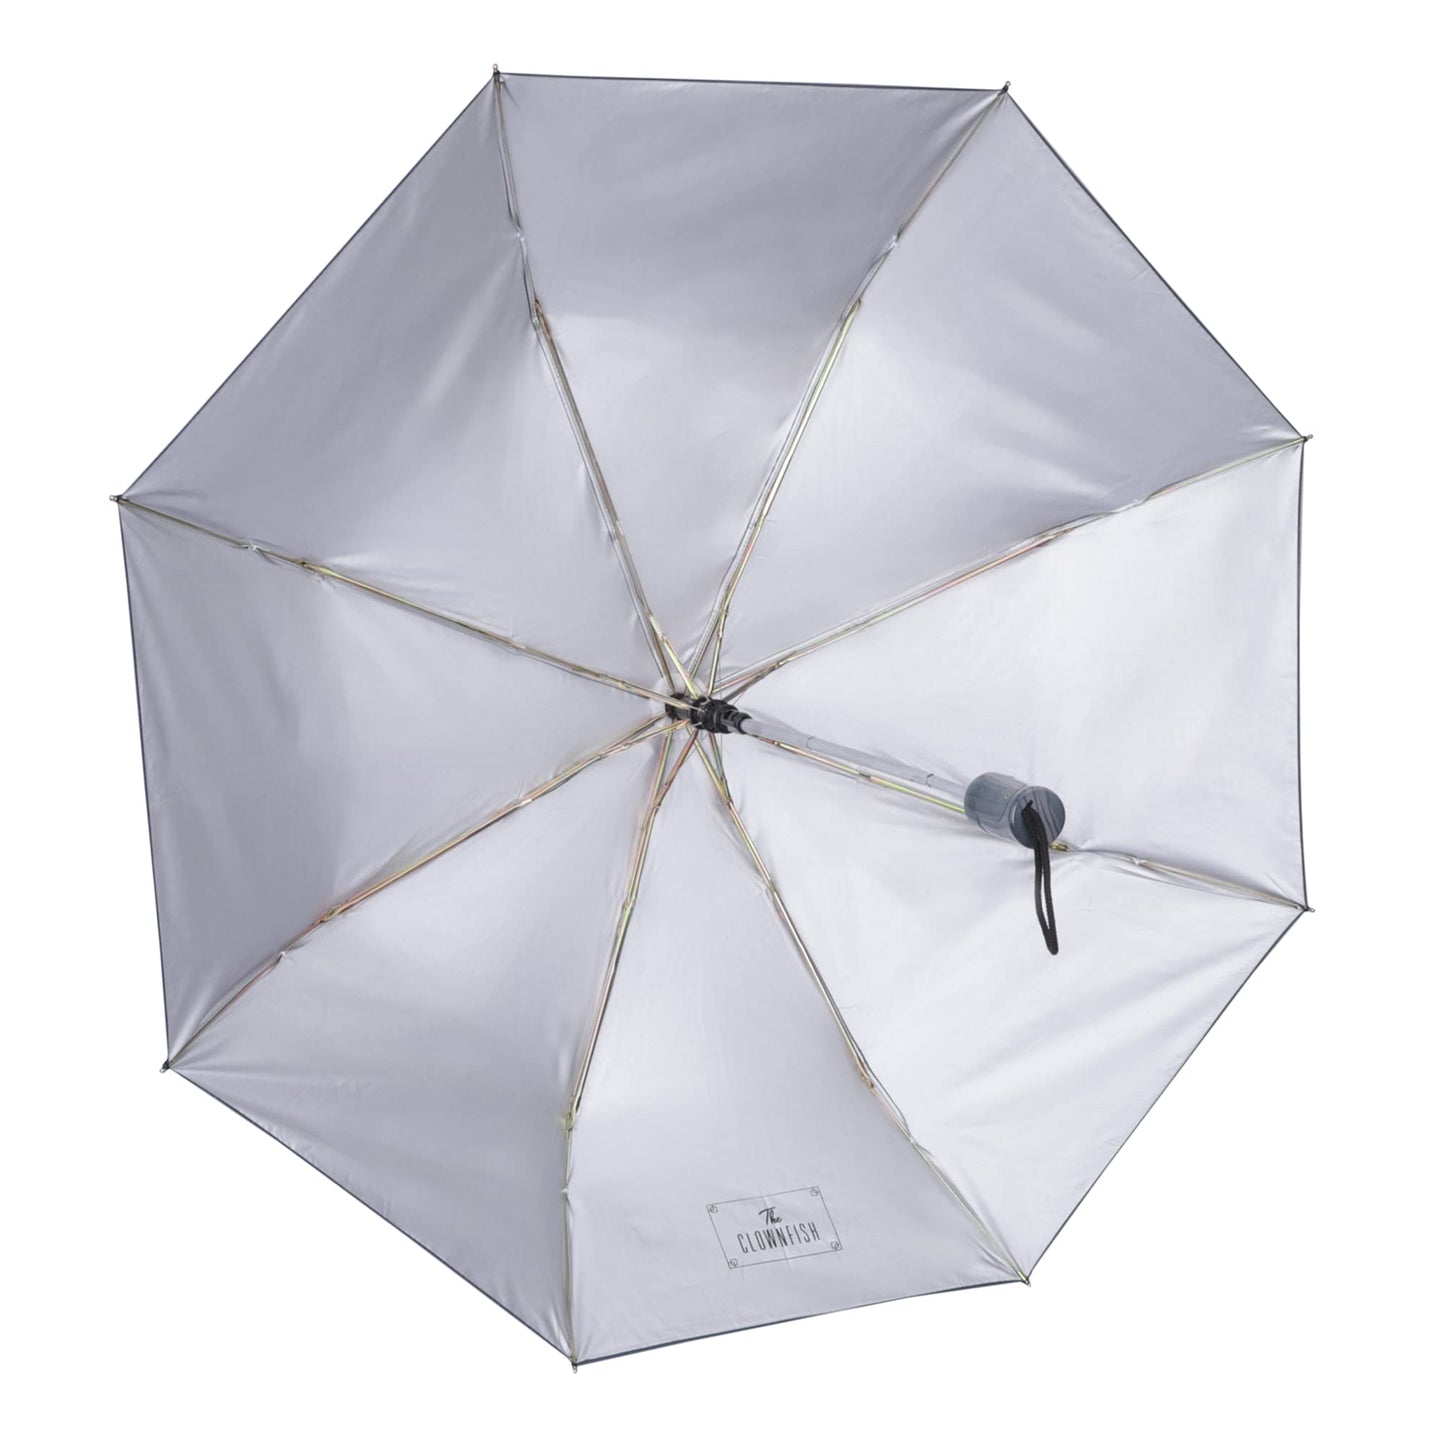 THE CLOWNFISH Umbrella 3 Fold Auto Open Waterproof 190 T Polyester Double Coated Silver Lined Umbrellas For Men and Women (Printed Design- Dark Blue)